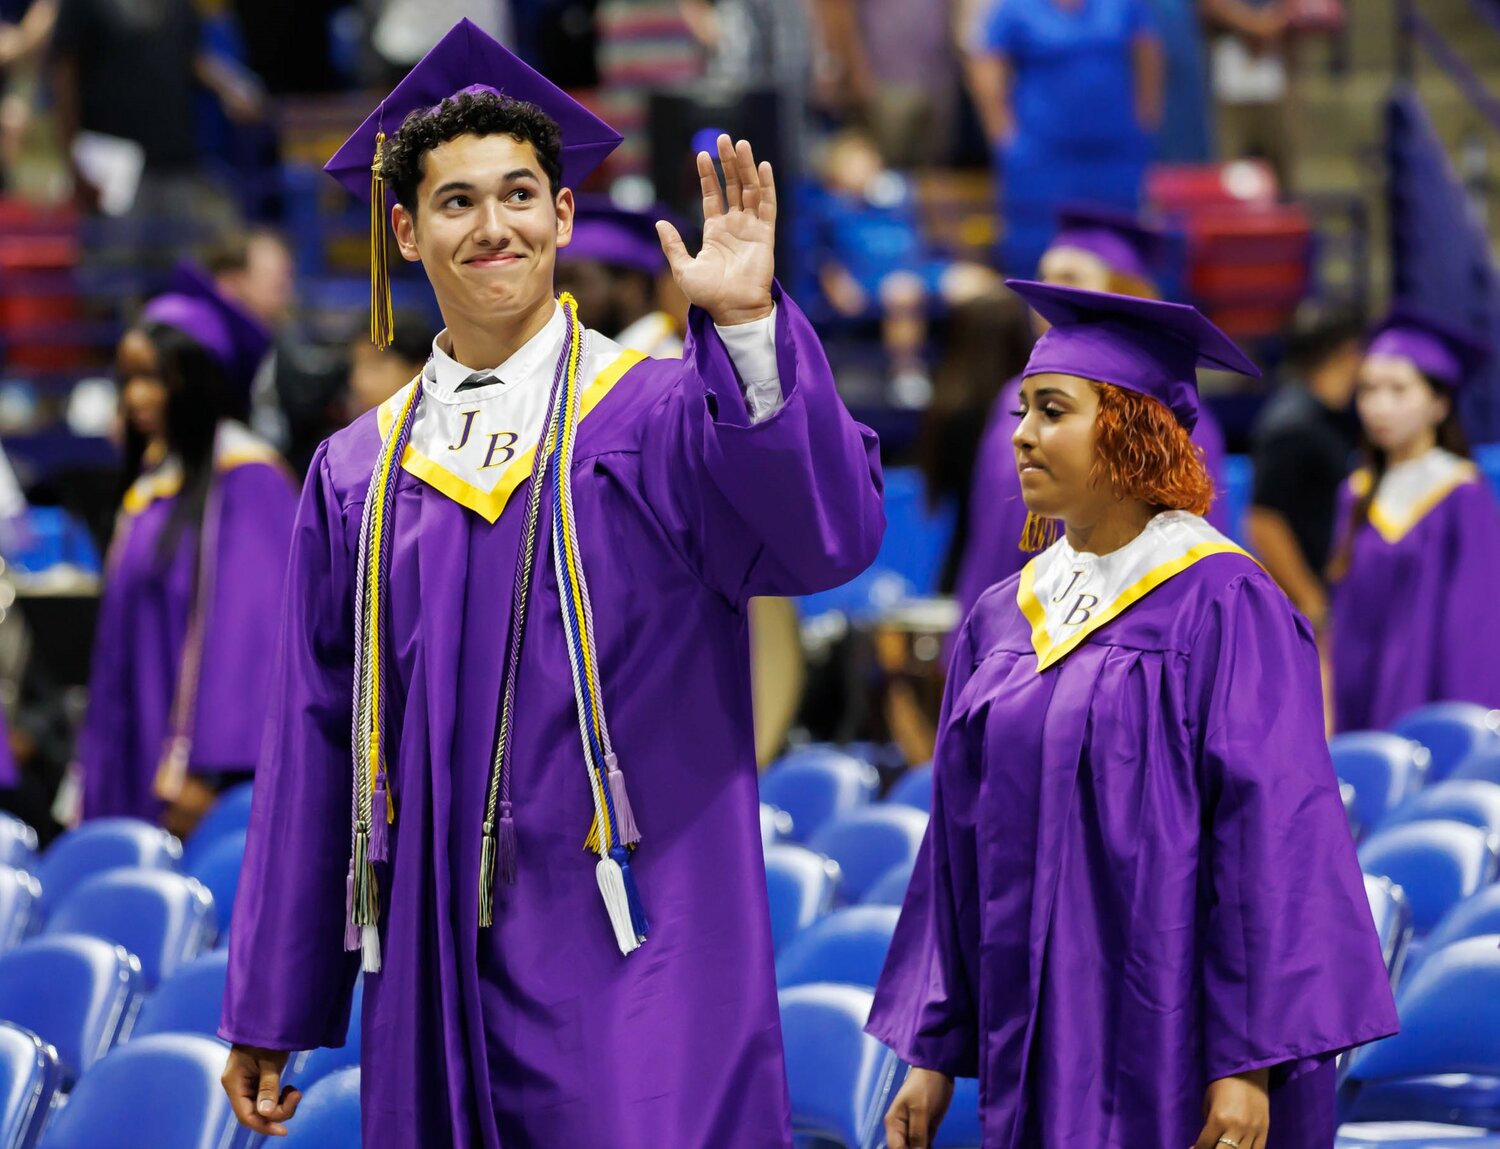 A Jack Britt High School student waves to someone in the crowd during the 2023 commencement Wednesday at the Crown Coliseum.